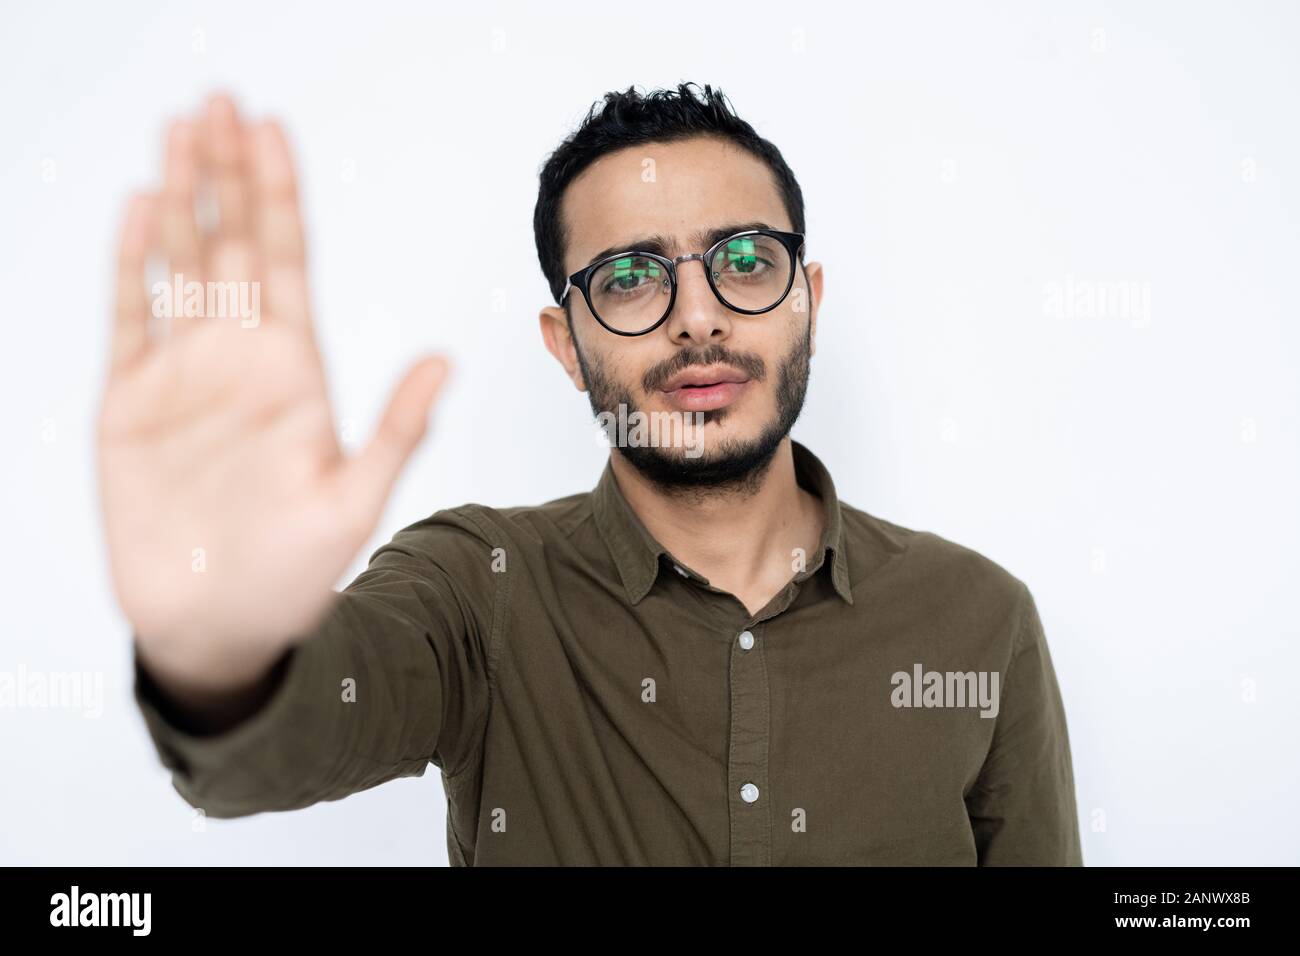 Young man in shirt and eyeglasses showing stop sign to make warning Stock Photo